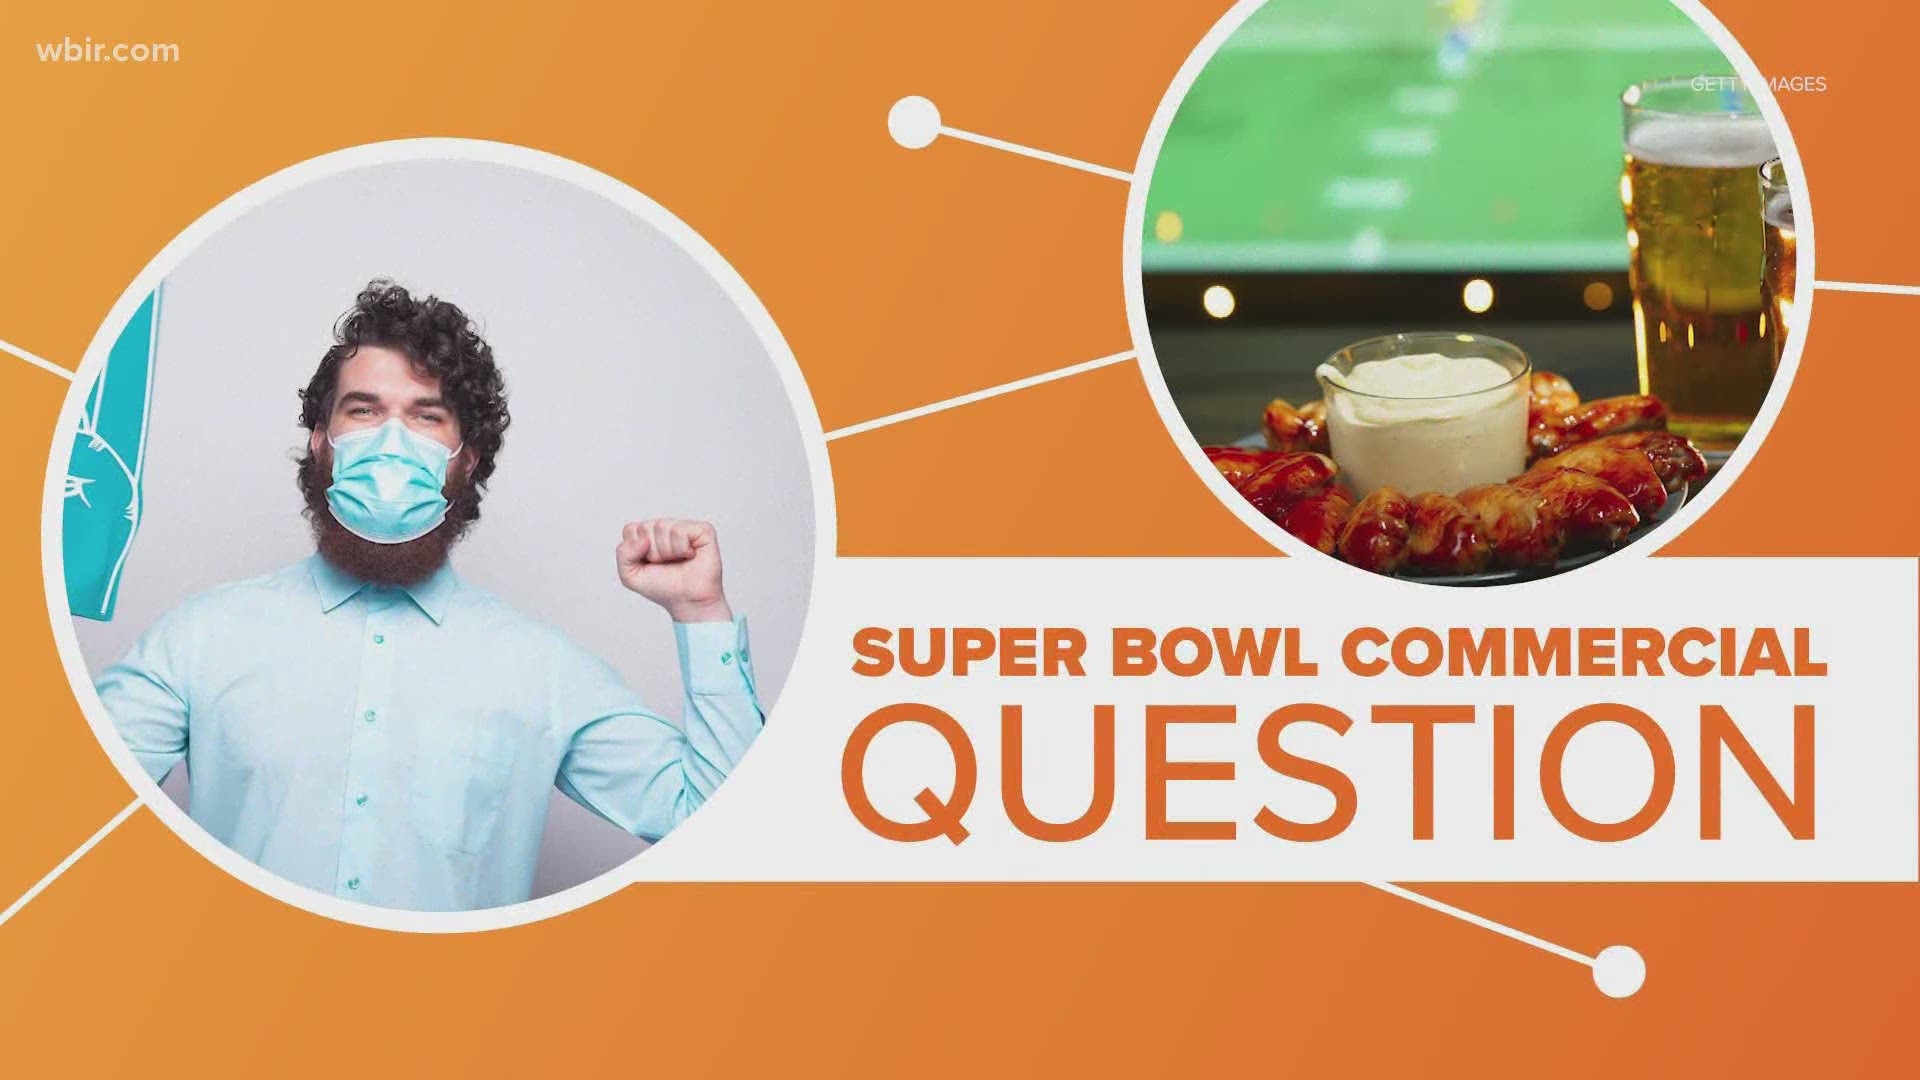 Companies paying big bucks to air commercials during the super bowl are having to grapple with a big question this year: ignore the pandemic or address it.